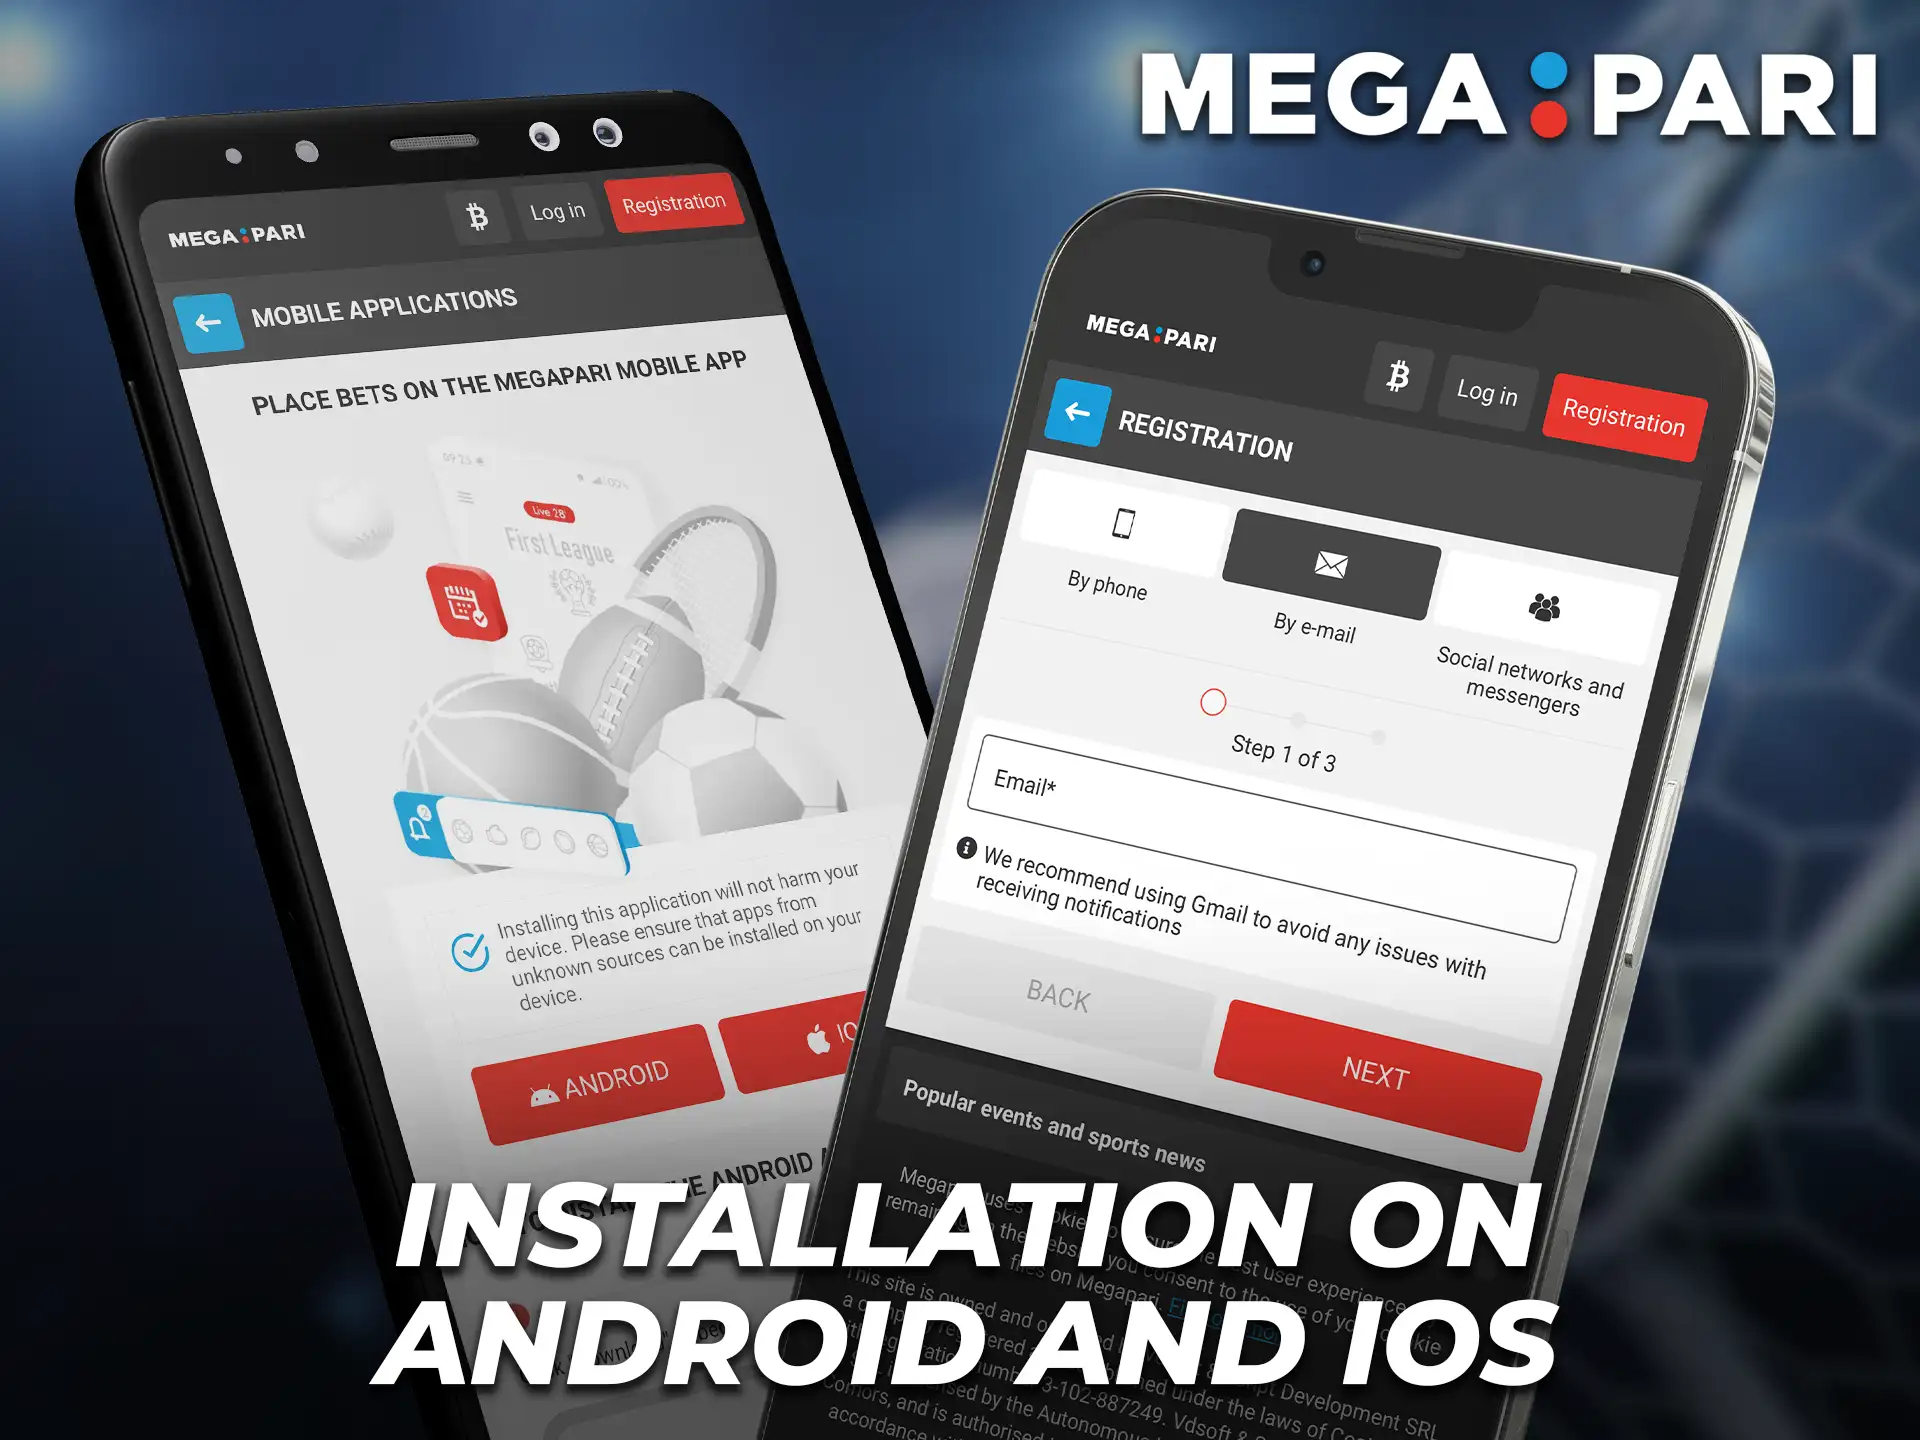 If the installation of the application on your phone does not start automatically, you need to follow a few steps.